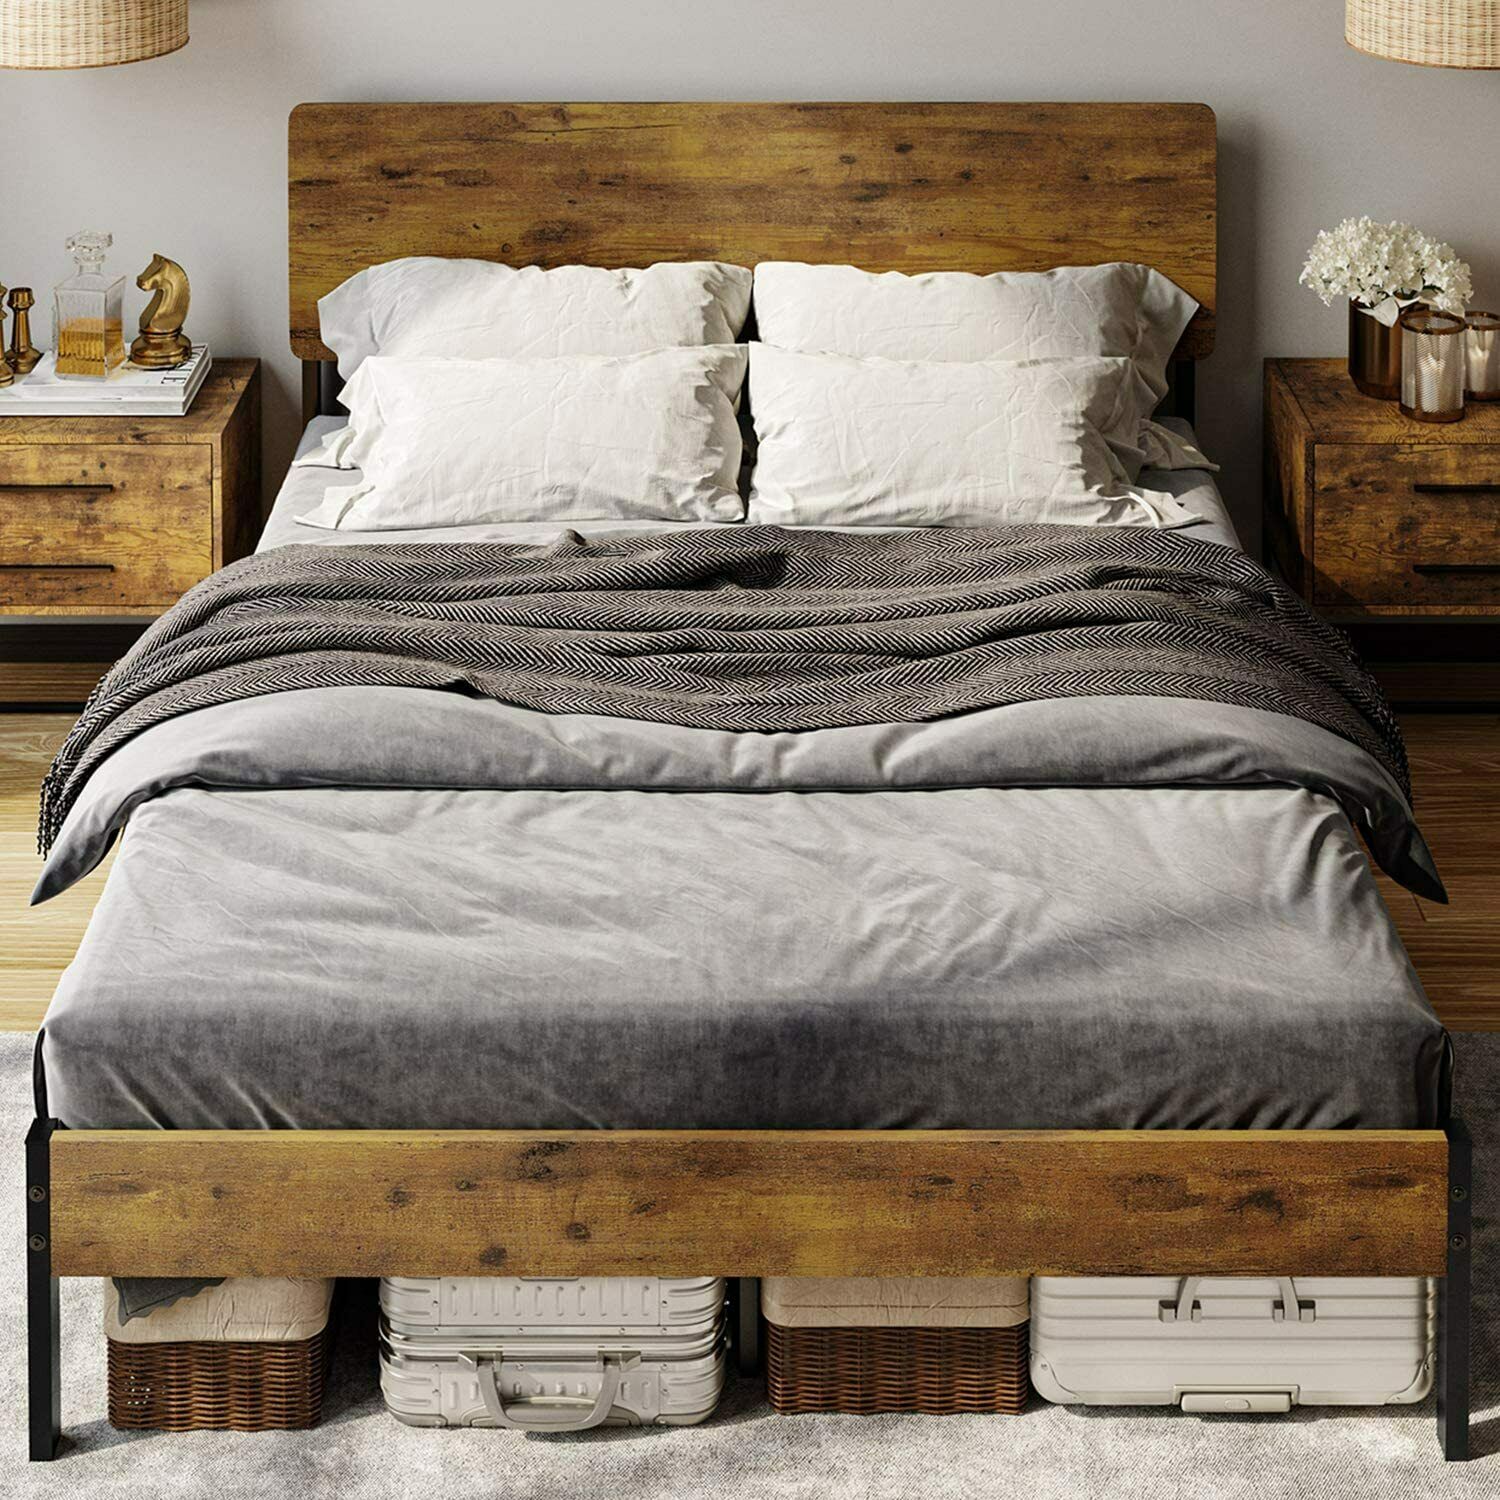 Metal Queen Size Bed Frame with Wood Headboard & Footboard, Rustic Country Style